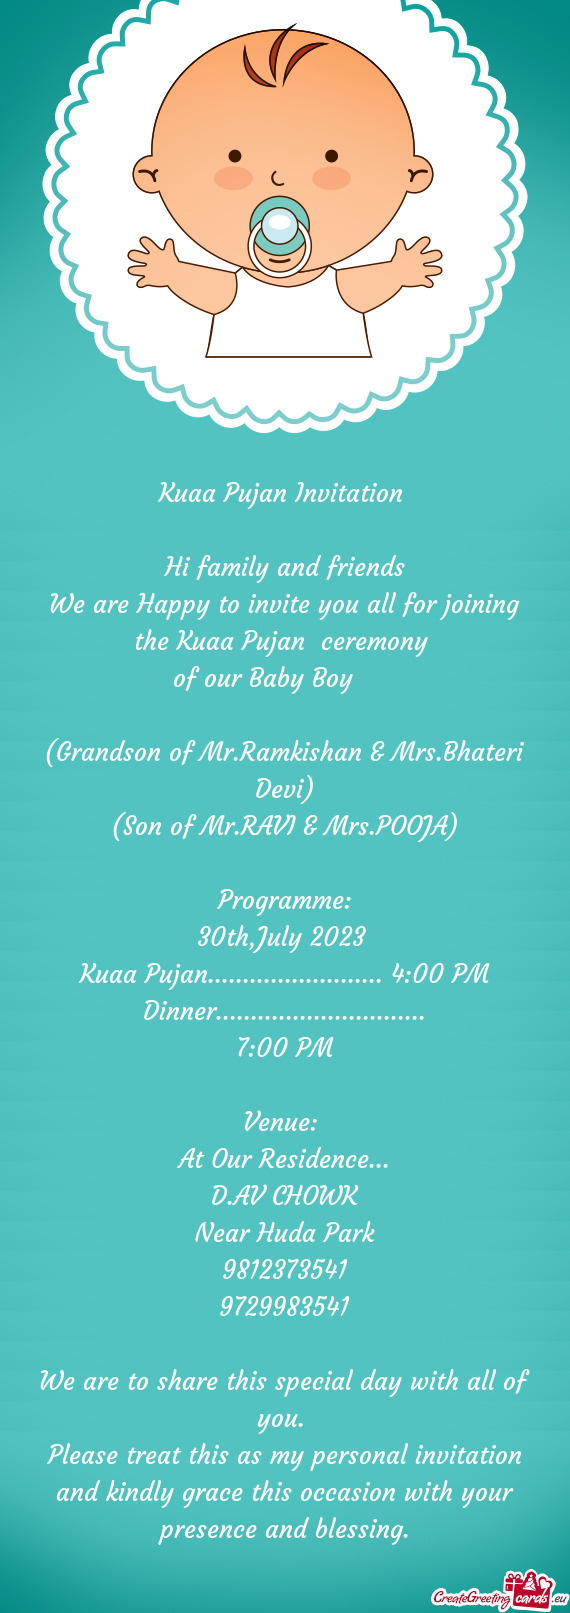 Kuaa Pujan Invitation  Hi family and friends We are Happy to invite you all for joining the Kuaa